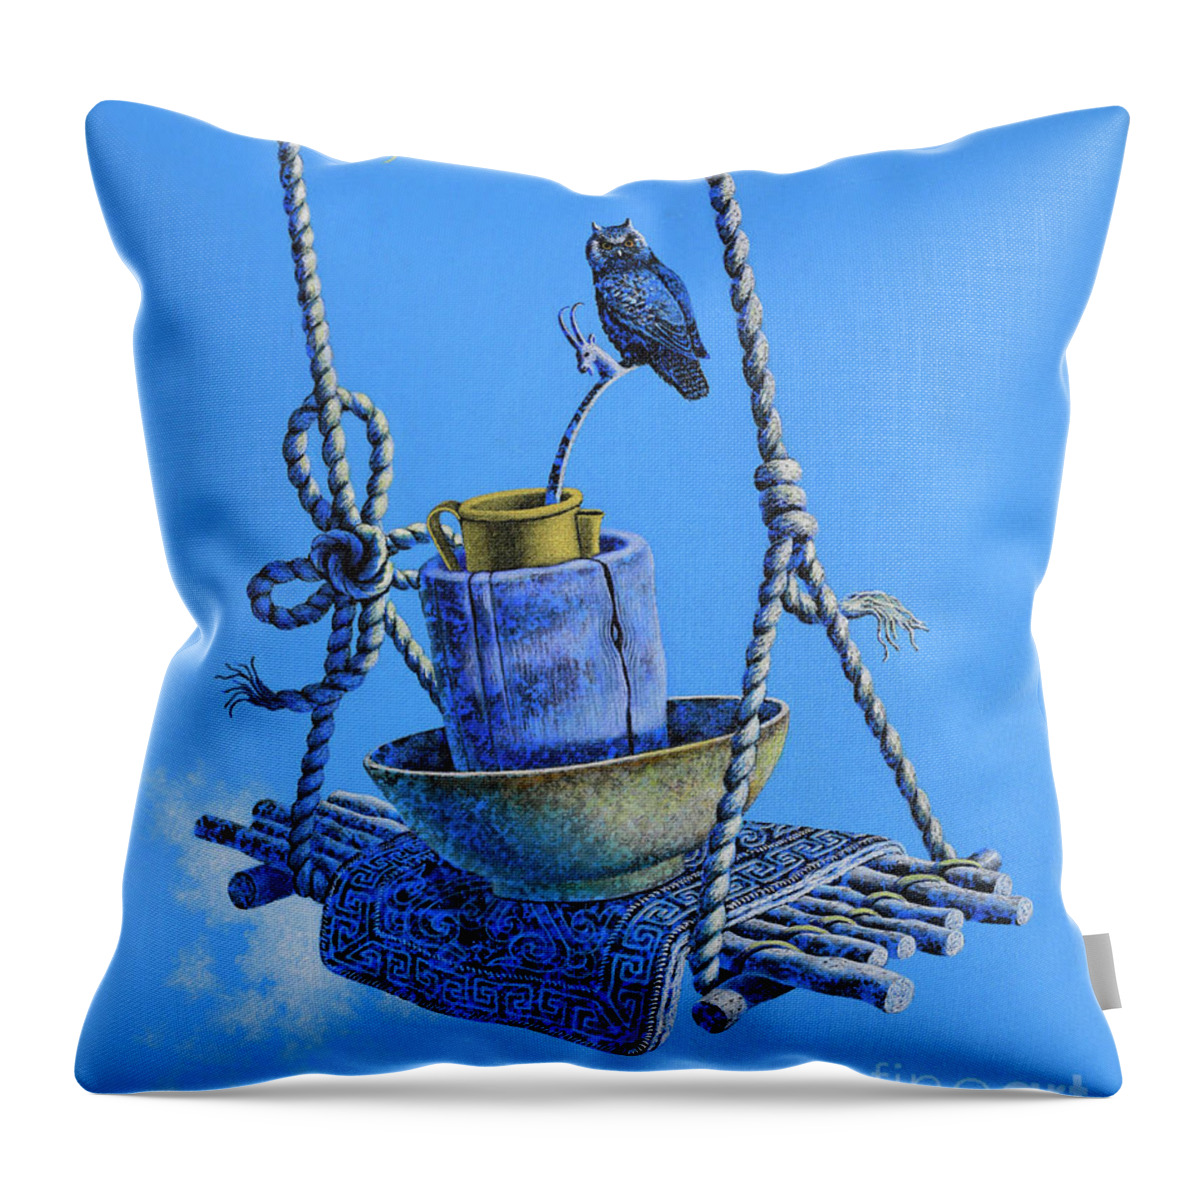 Oil On Canvas Throw Pillow featuring the painting Traditional by Oilan Janatkhaan